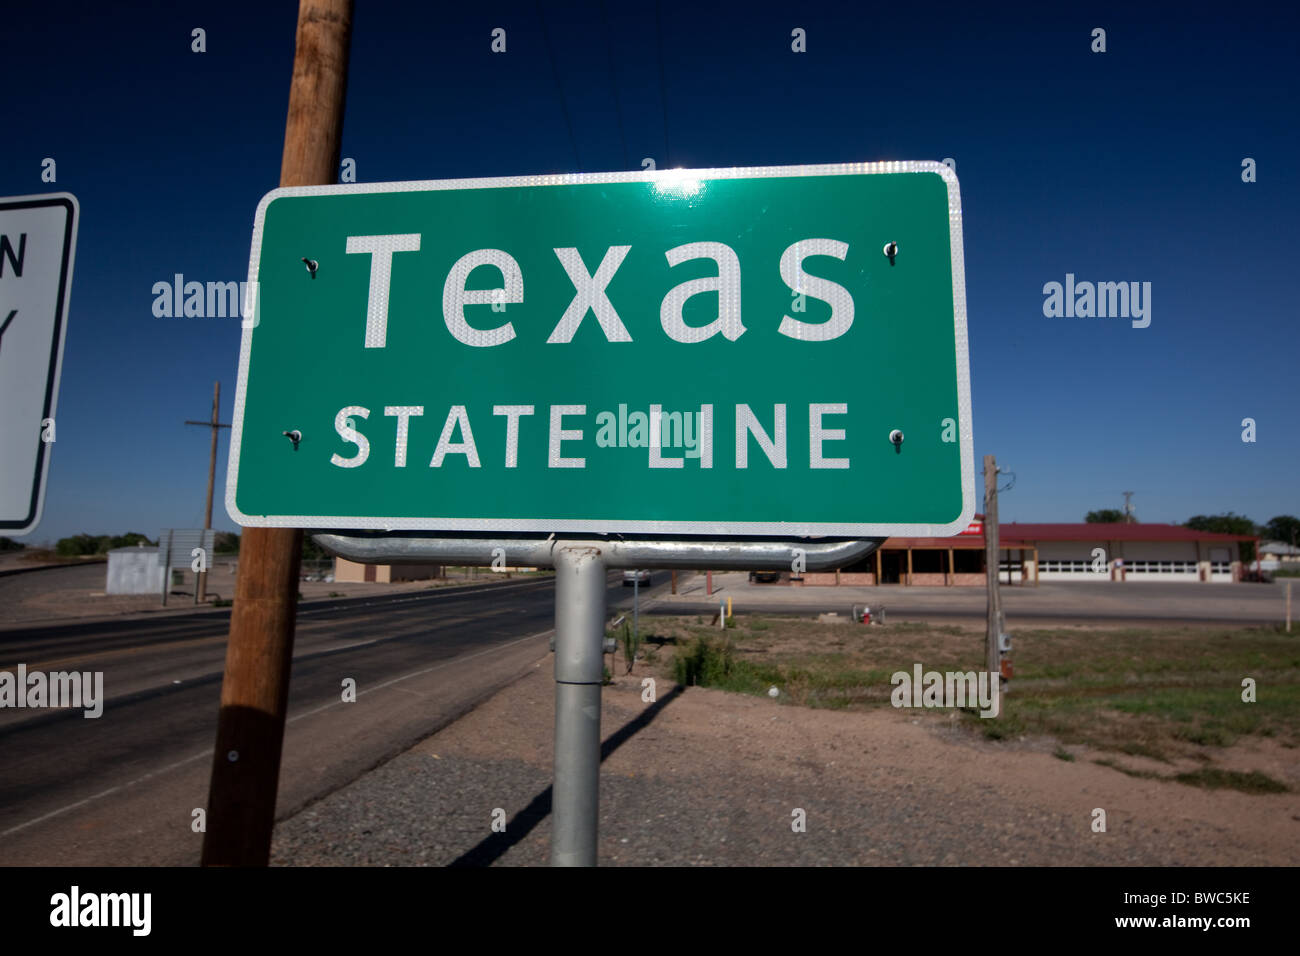 Road sign showing state line between Farwell, Texas and Texico, New Mexico Stock Photo